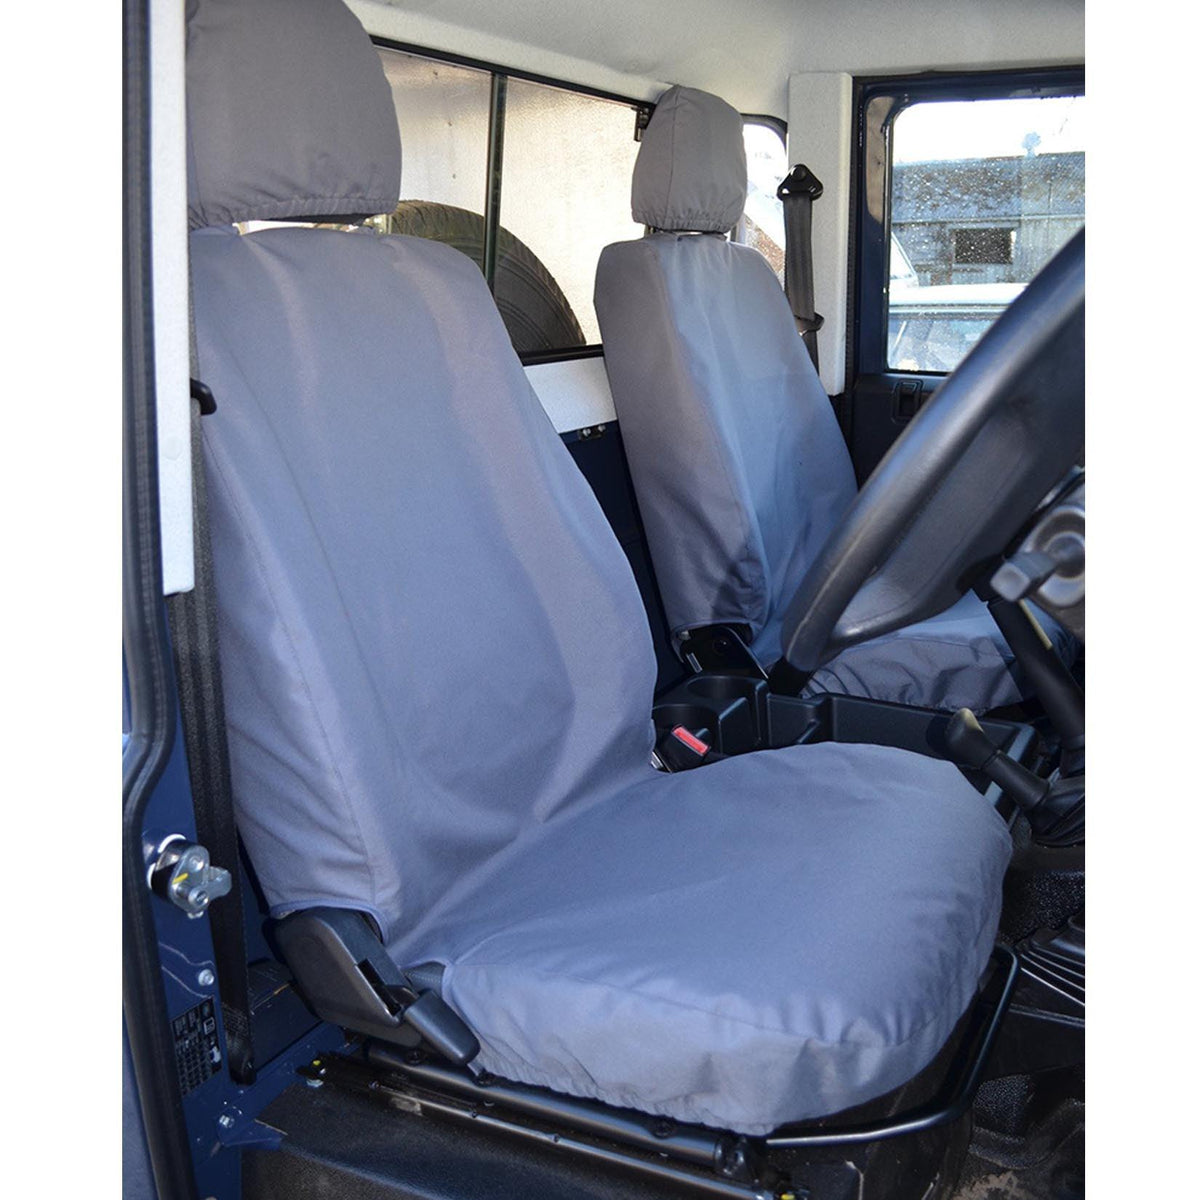 LAND ROVER DEFENDER 90 110 - 2007-2013 DRIVER AND FRONT SINGLE PASSENGER SEAT COVERS - PAIR - GREY - Storm Xccessories2